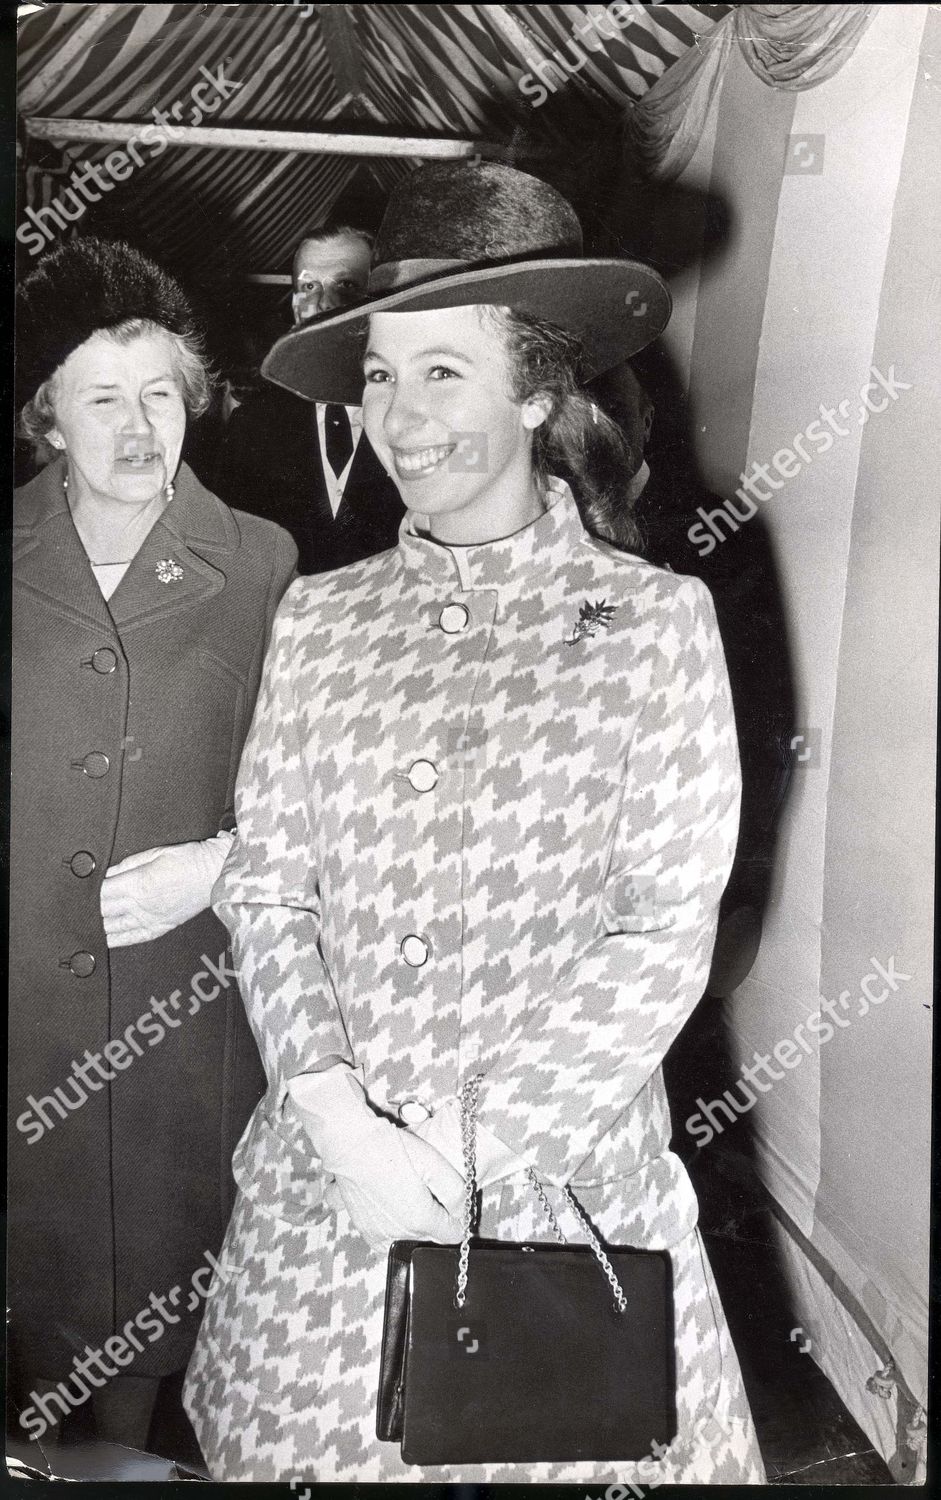 princess-anne-now-princess-royal-4-november-1969-a-smiling-princess-anne-sporting-a-pony-tail-and-wearing-a-wide-brimmed-hat-and-two-piece-costume-seen-at-the-wedding-at-st-michaels-church-chester-square-london-this-afternoon-of-mr-george-pilking-shutterstock-editorial-890850a.jpg